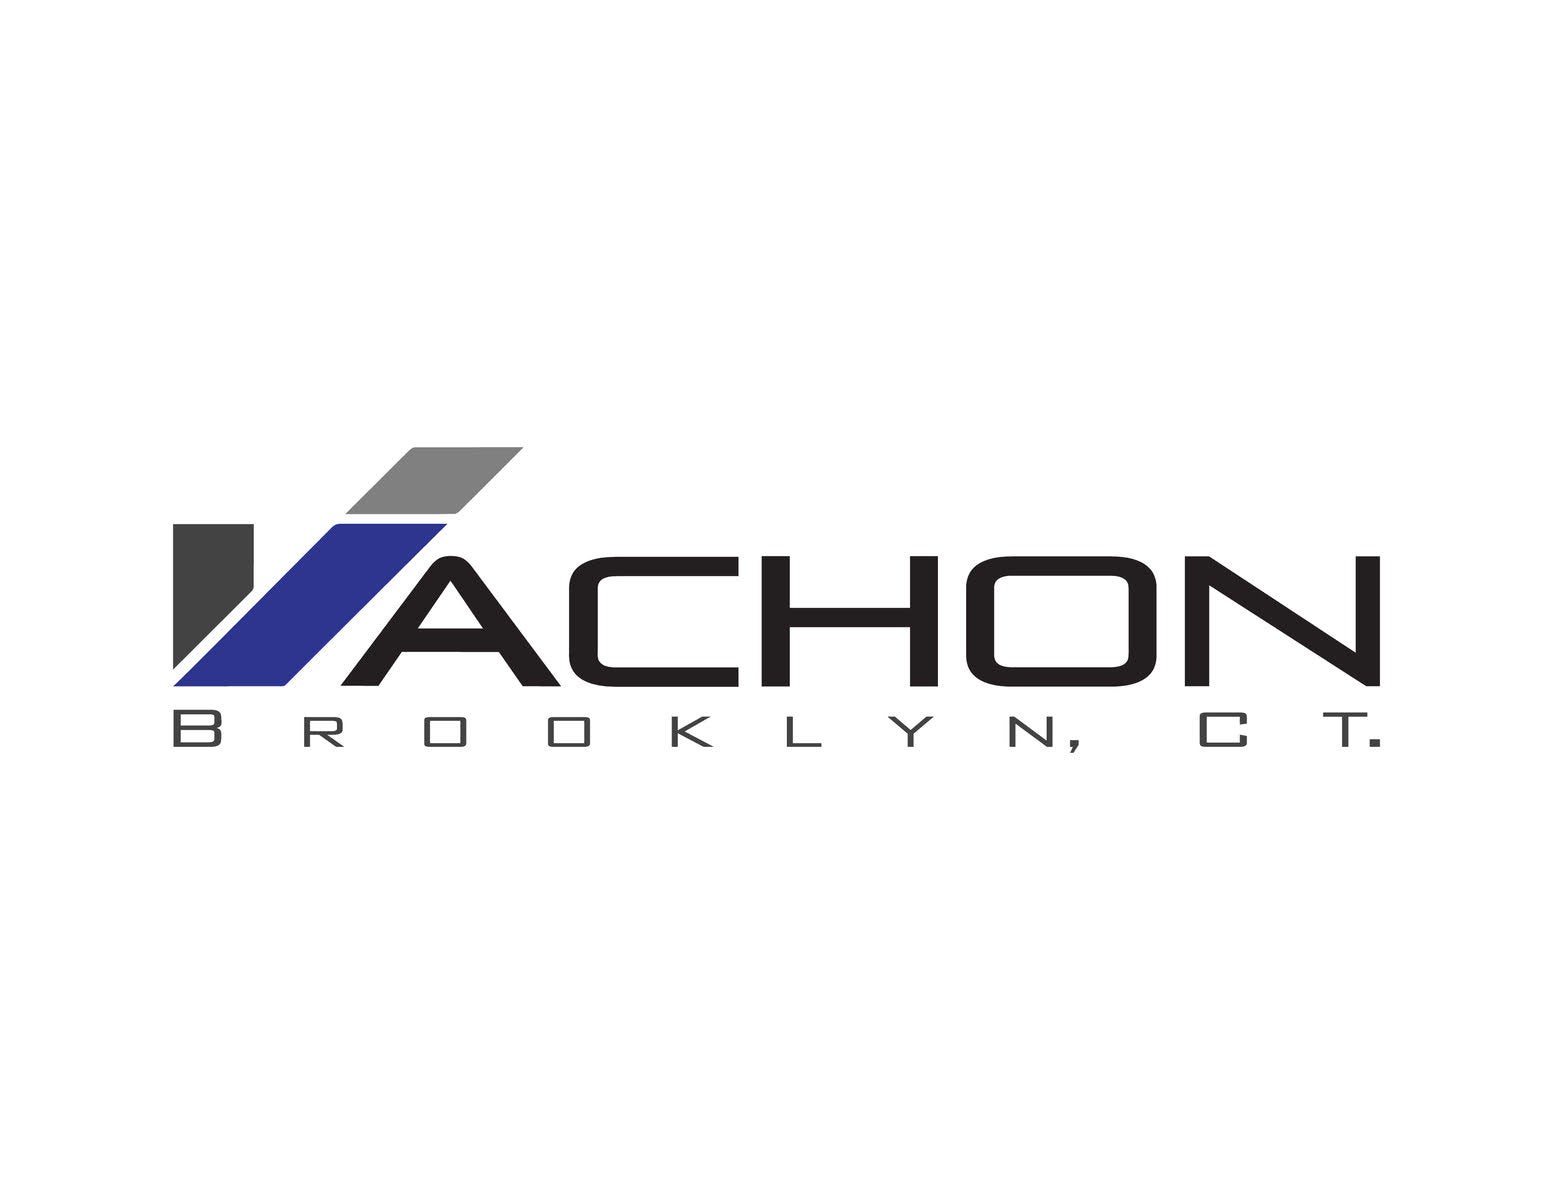 Vachon Chevrolet - Brooklyn, CT: Read Consumer reviews, Browse Used and